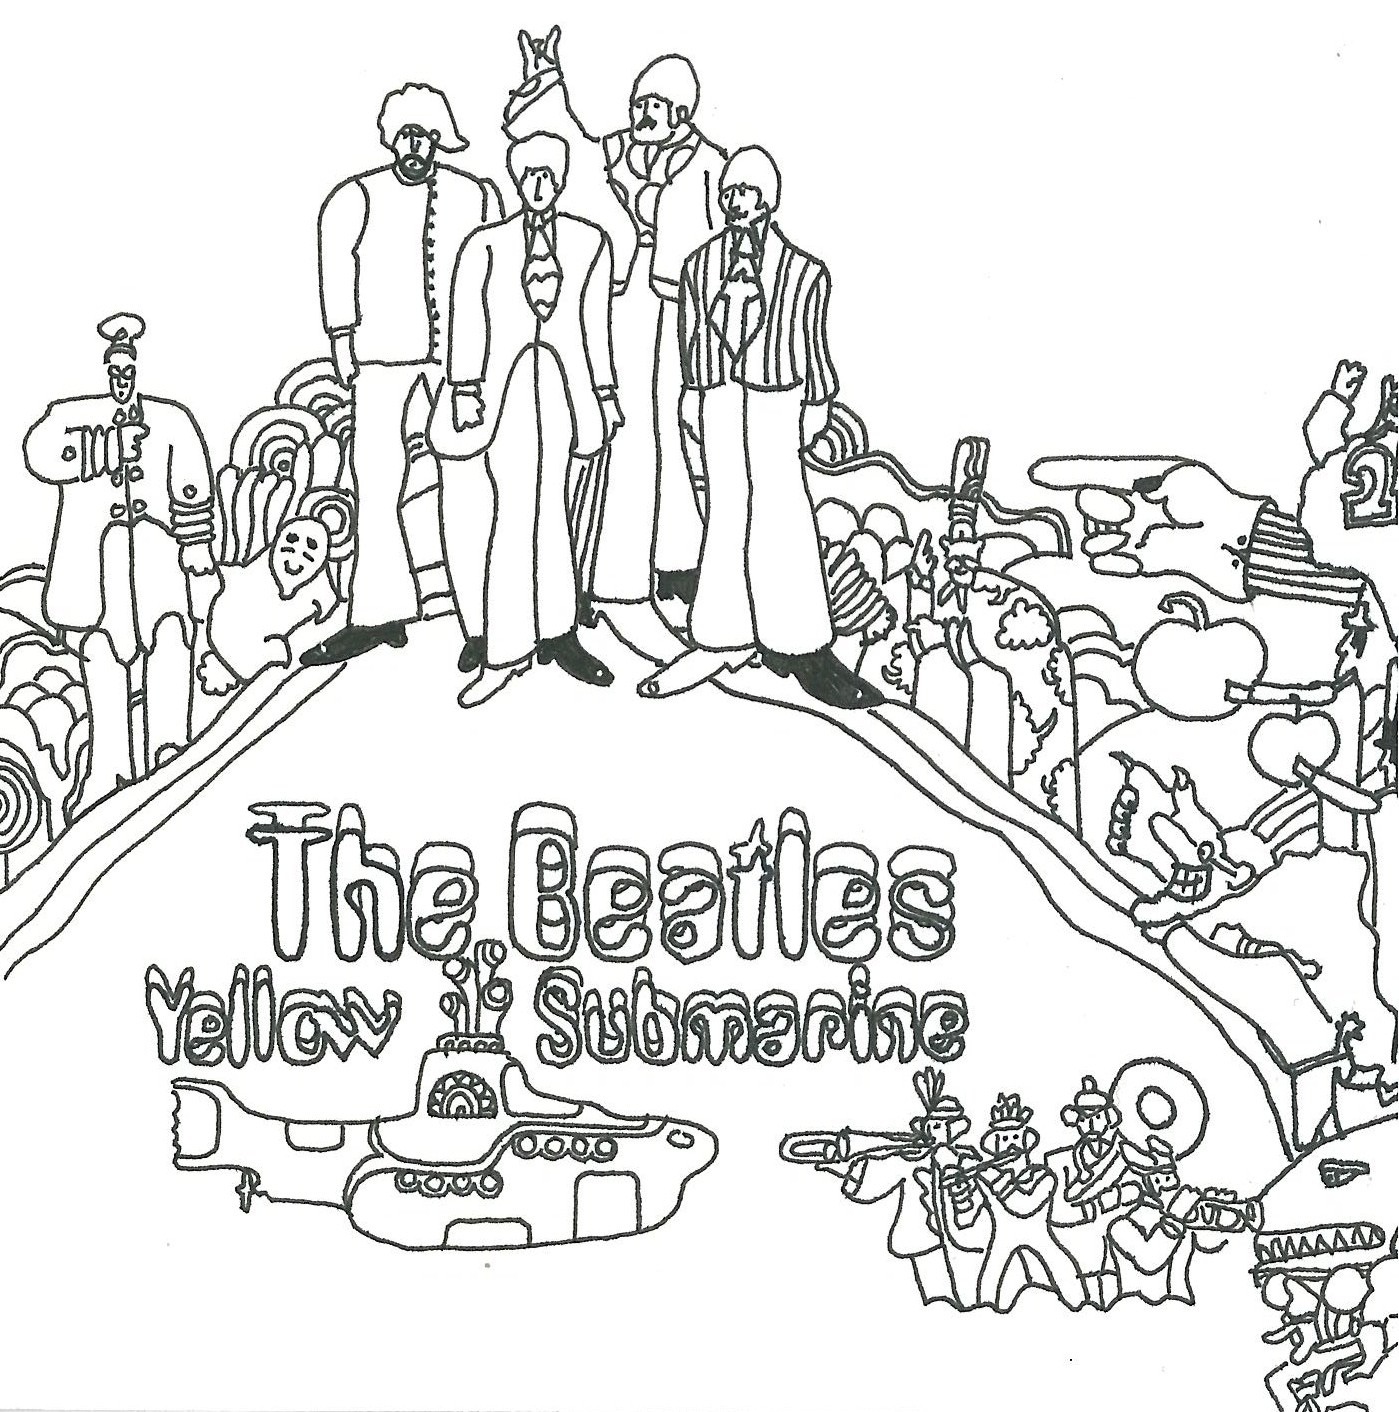 Dive into the magical world of the beatles with yellow submarine coloring pages